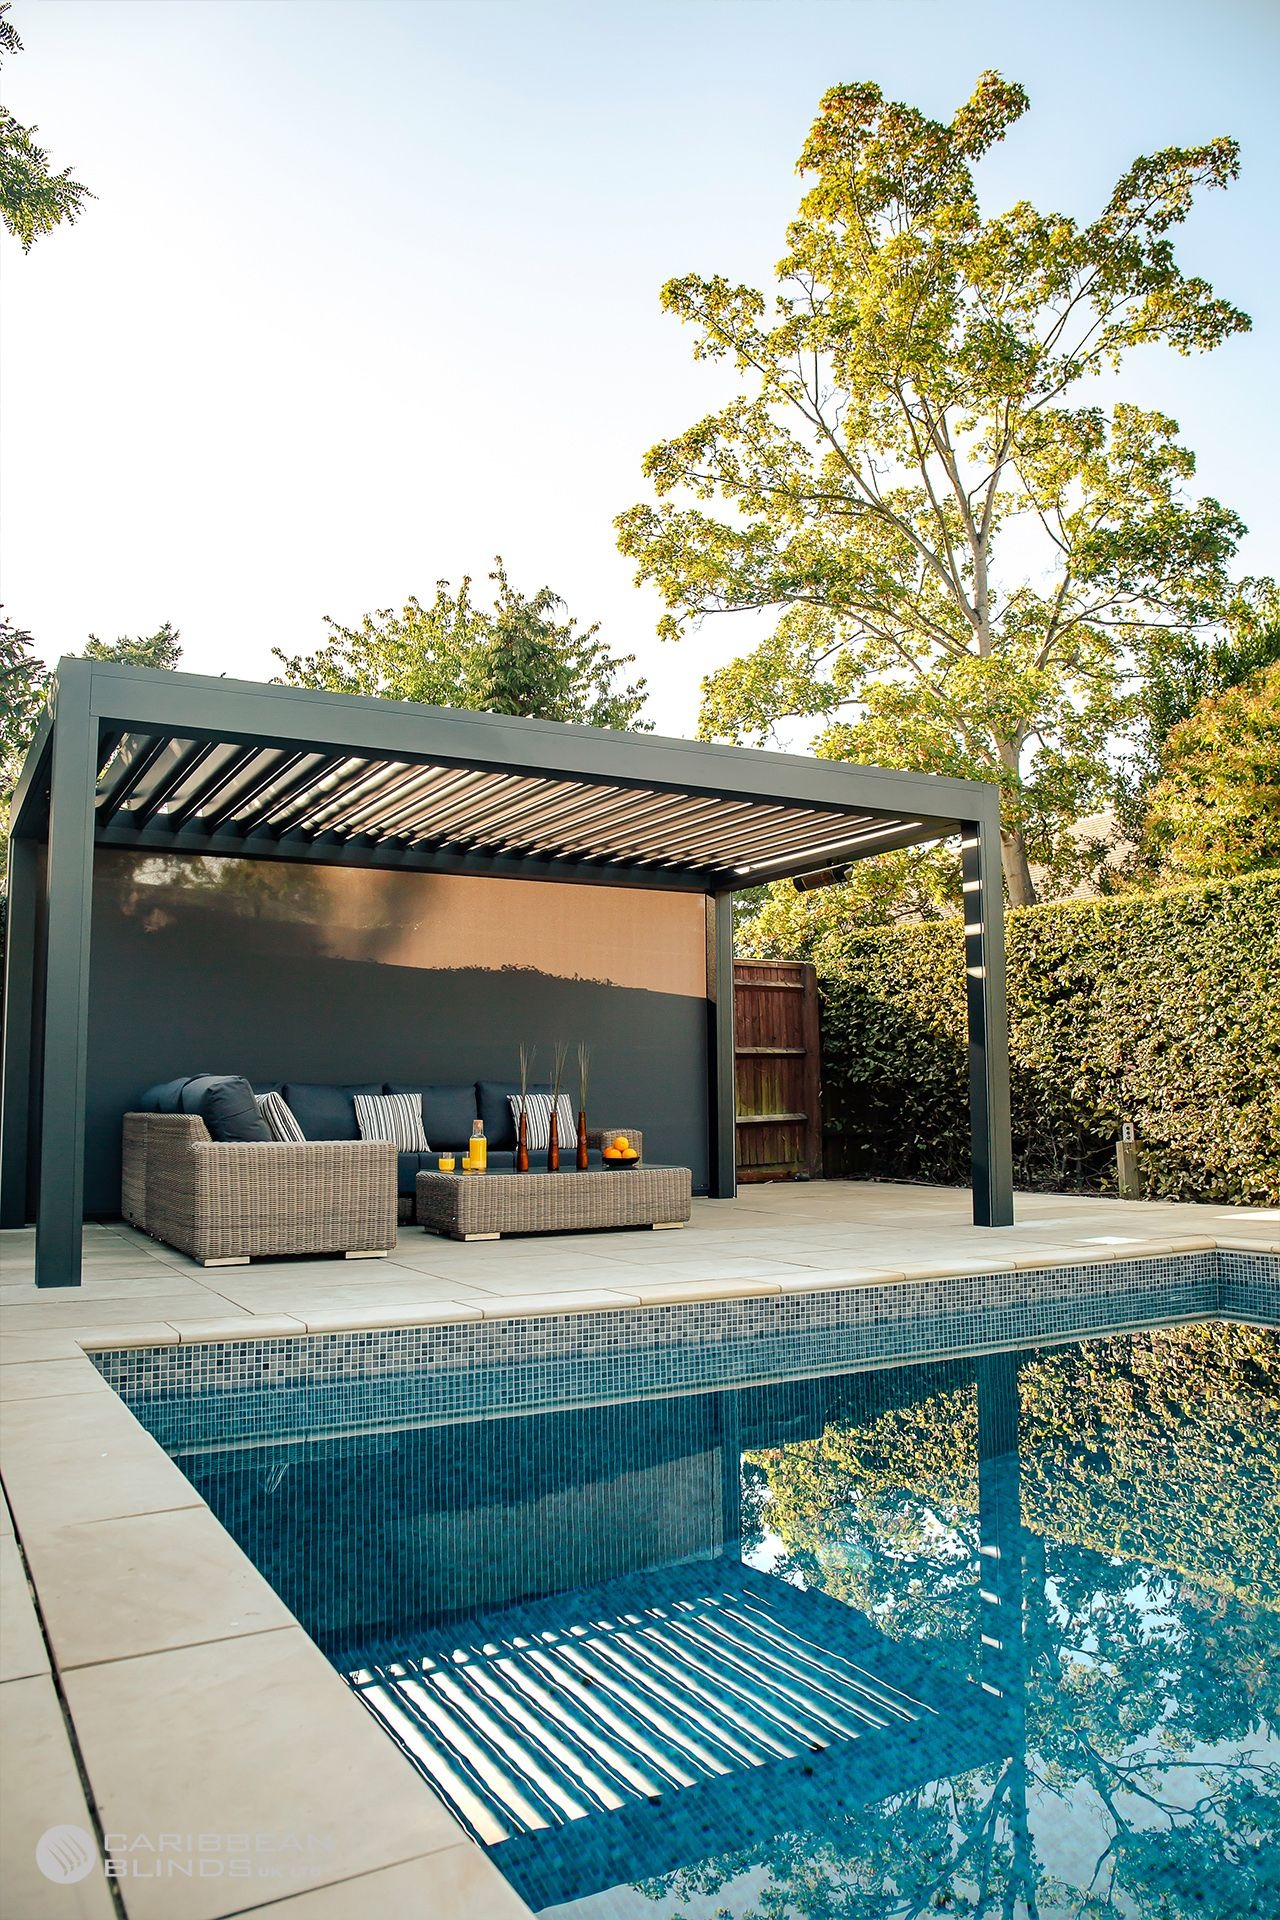 Add Pergola for An Outdoor Living Room